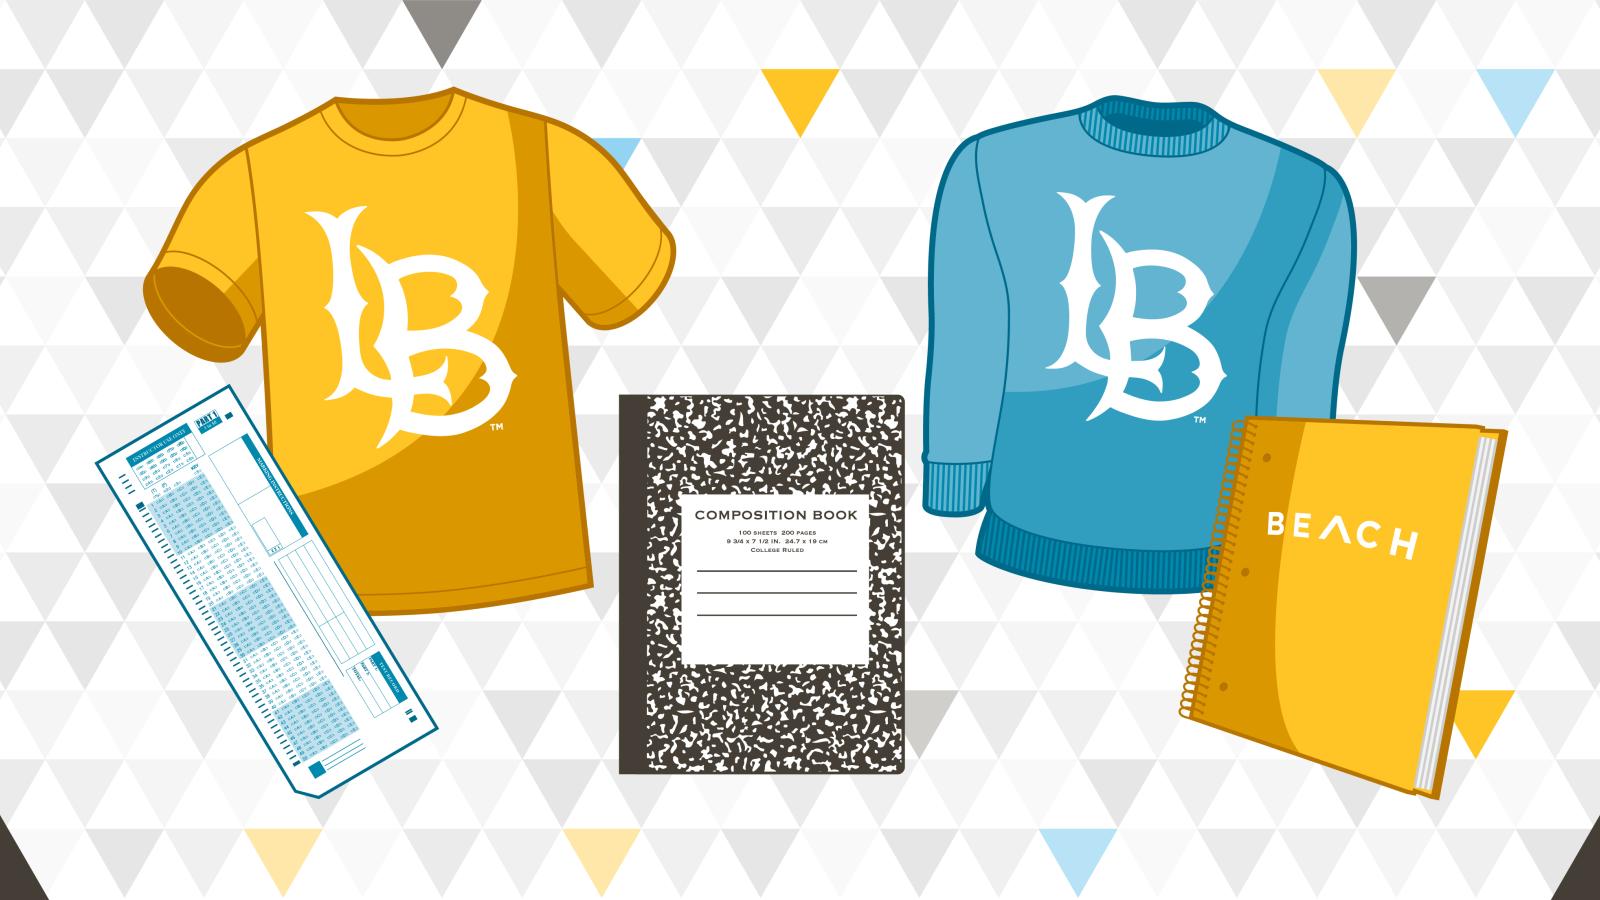 Animated long beach shirts, sweaters amd notebooks with an LB logo.